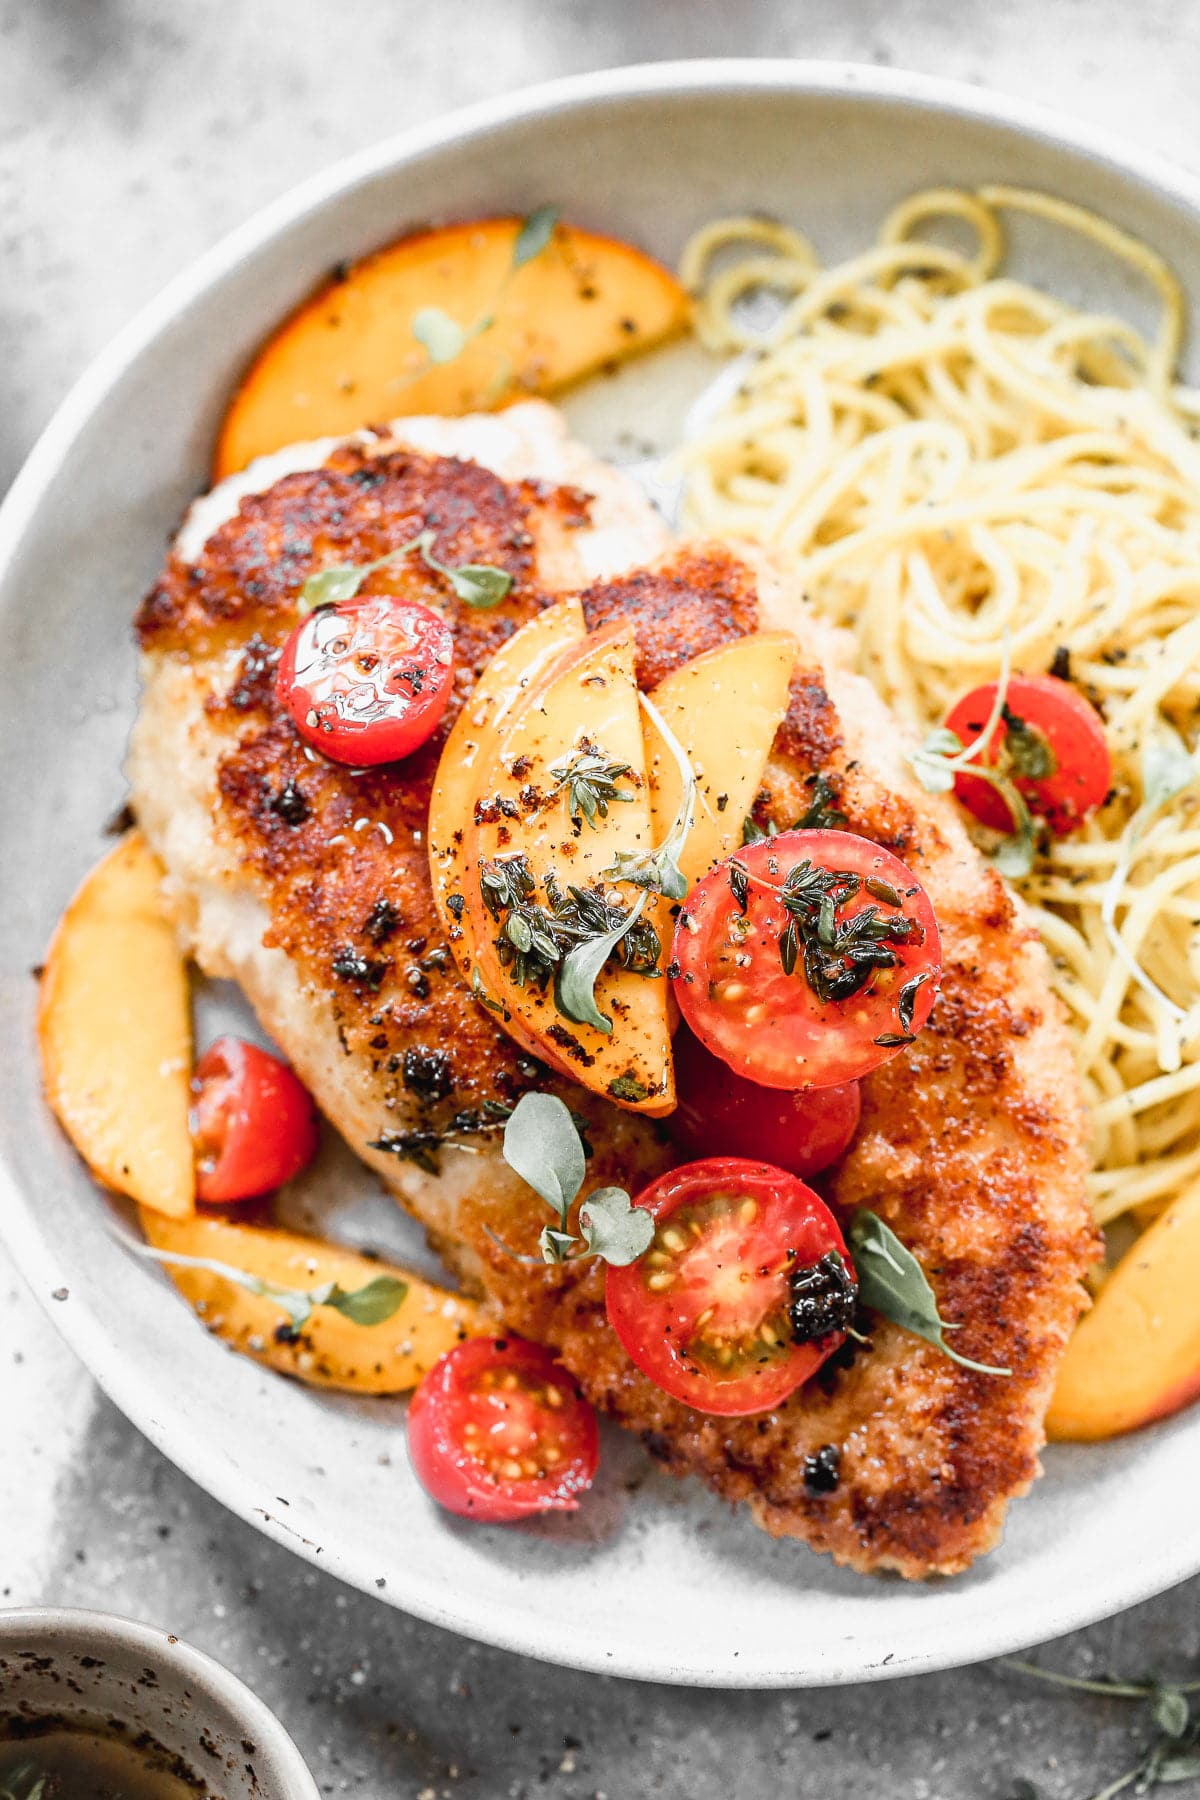 If summer were showcased on a plate it would surely be in the form of our Mozzarella-Stuffed Peach Chicken. This ultra crispy on the exterior, cheesy and tender on the interior winner of a chicken dish is adorned with the sweetest peaches and tomatoes and then drizzled with an intoxicating combination of brown butter, thyme, and lemon. You don't want to miss it!